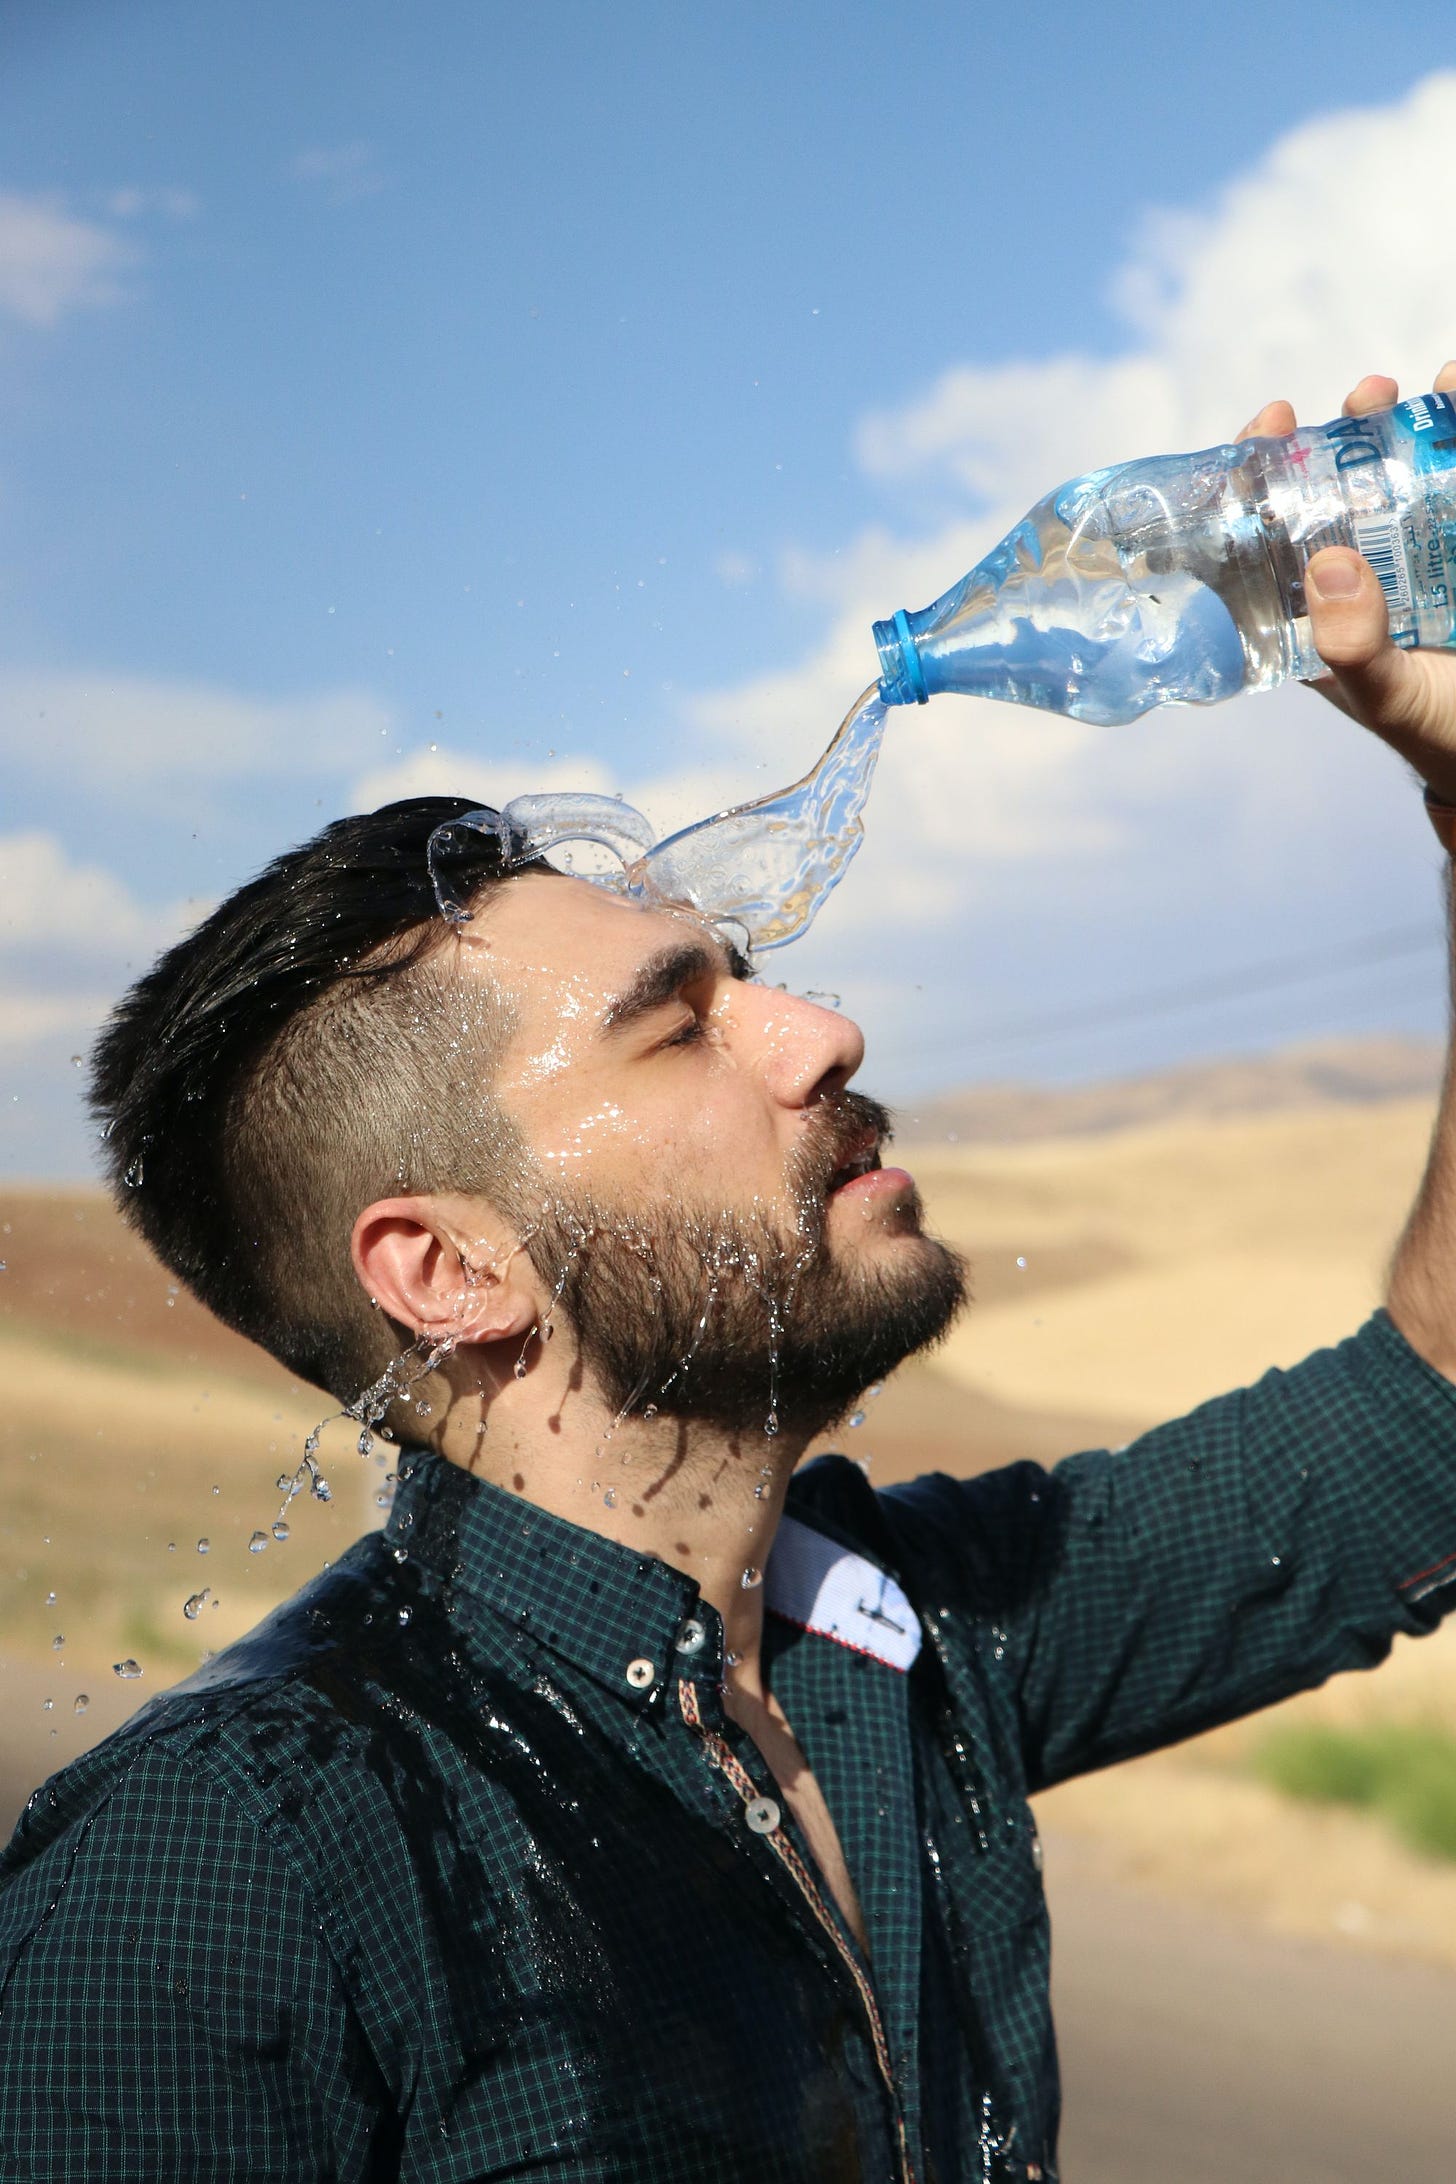 Topic 6: Hydration Part 3 - Signs of Dehydration, the Thirst Mechanism and Electrolytes